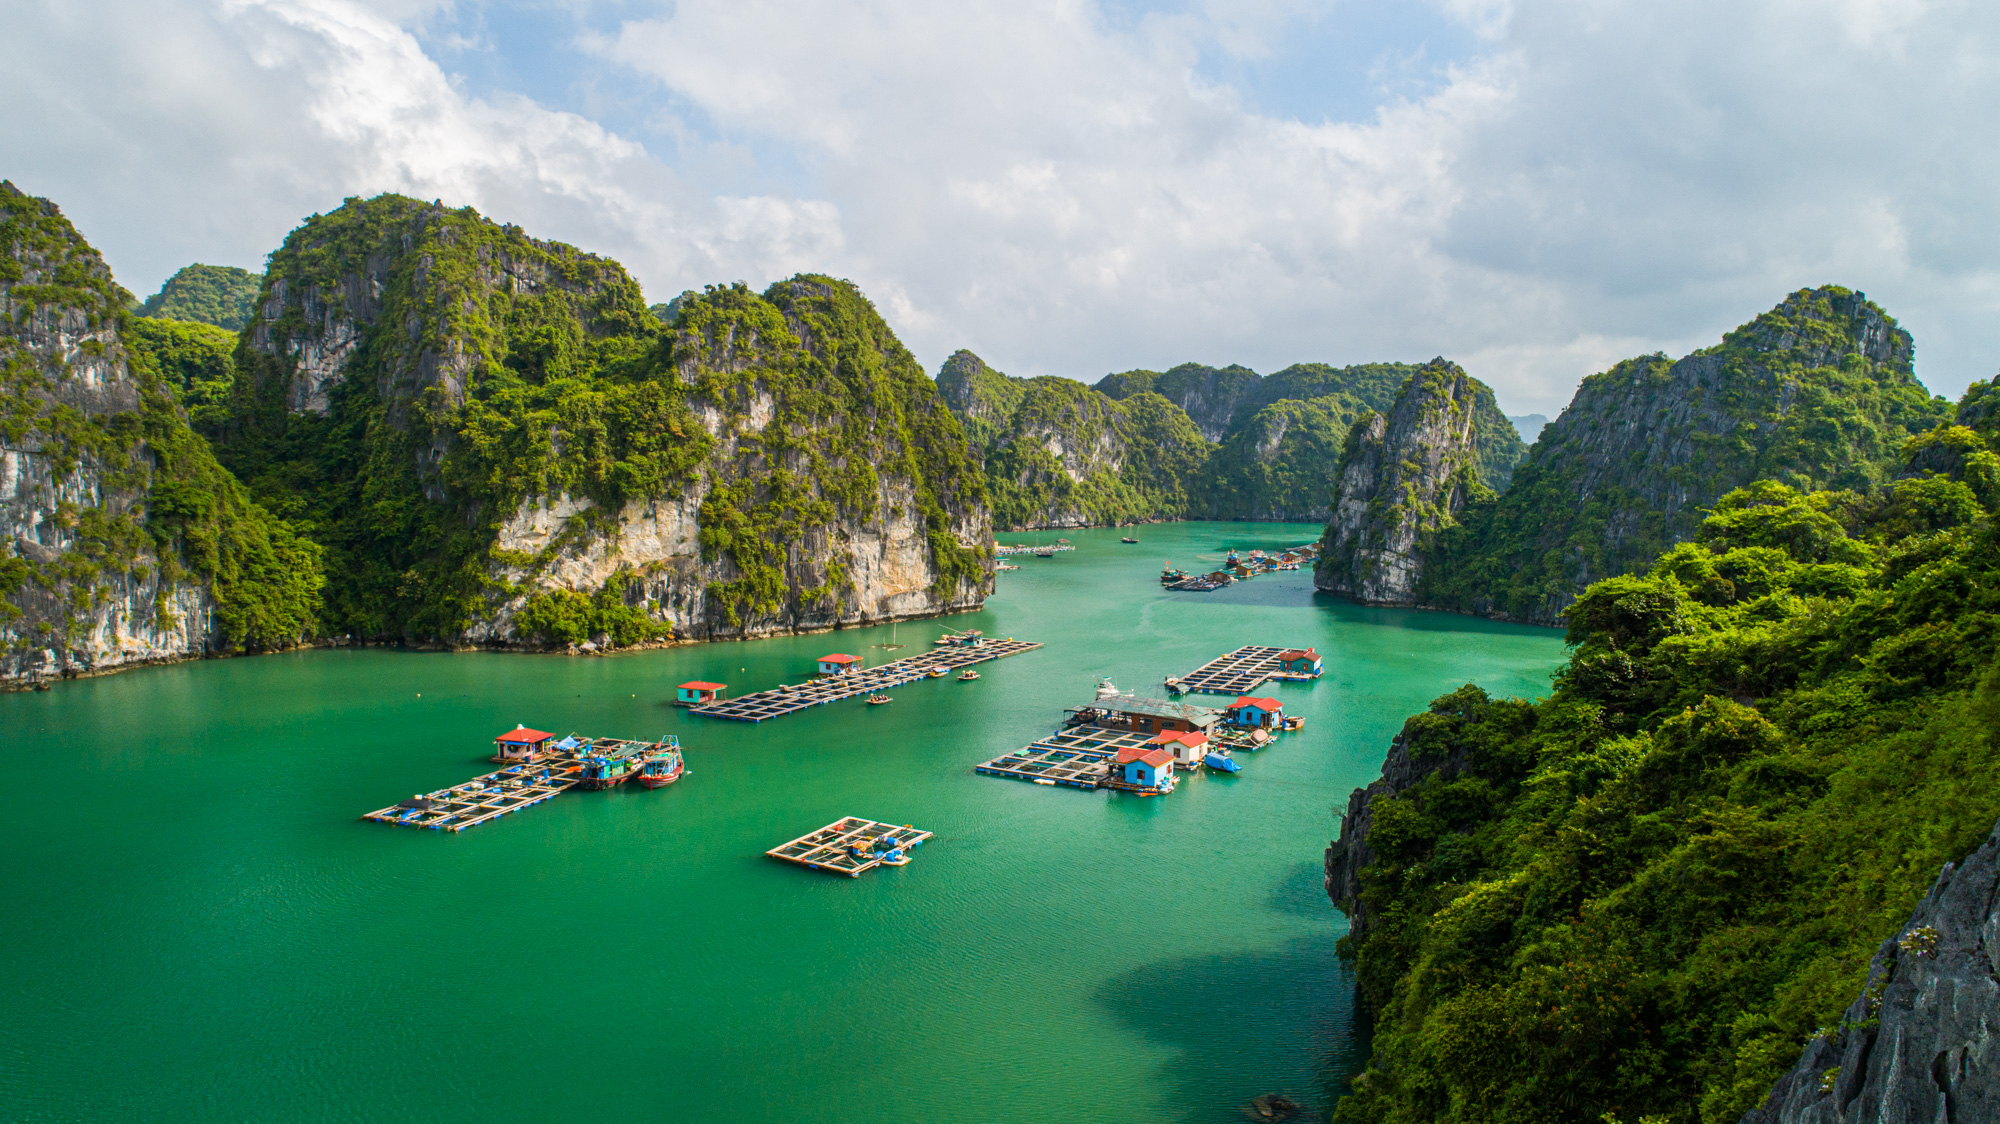 Halong Bay cruise - a must-try experience in Vietnam